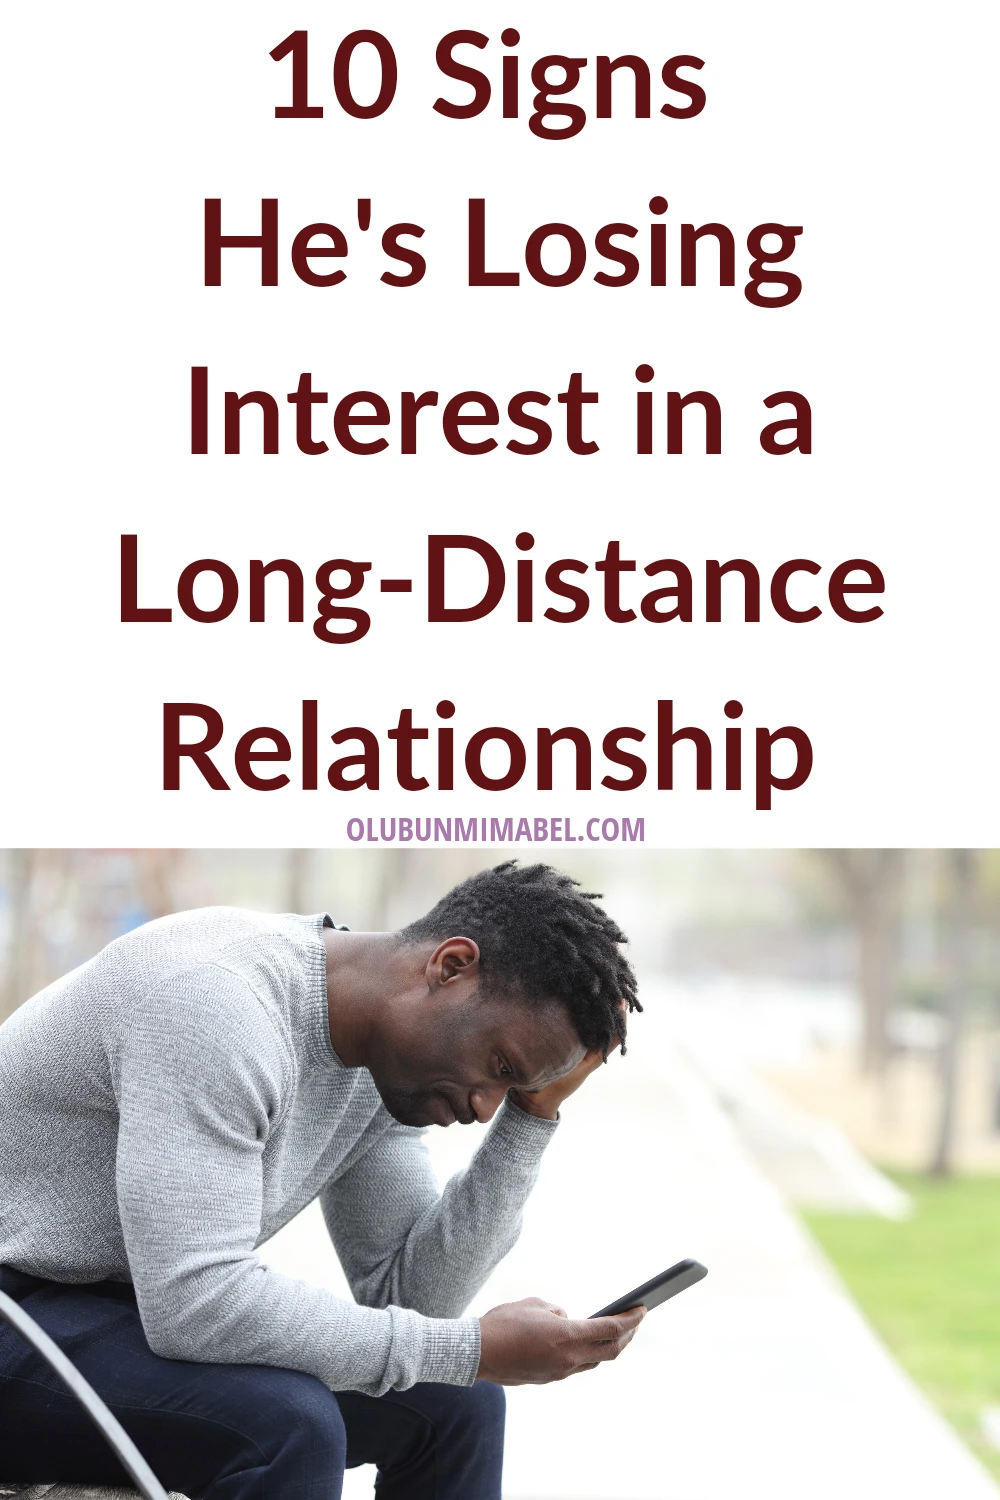 Signs He is Losing Interest in a Long Distance Relationship